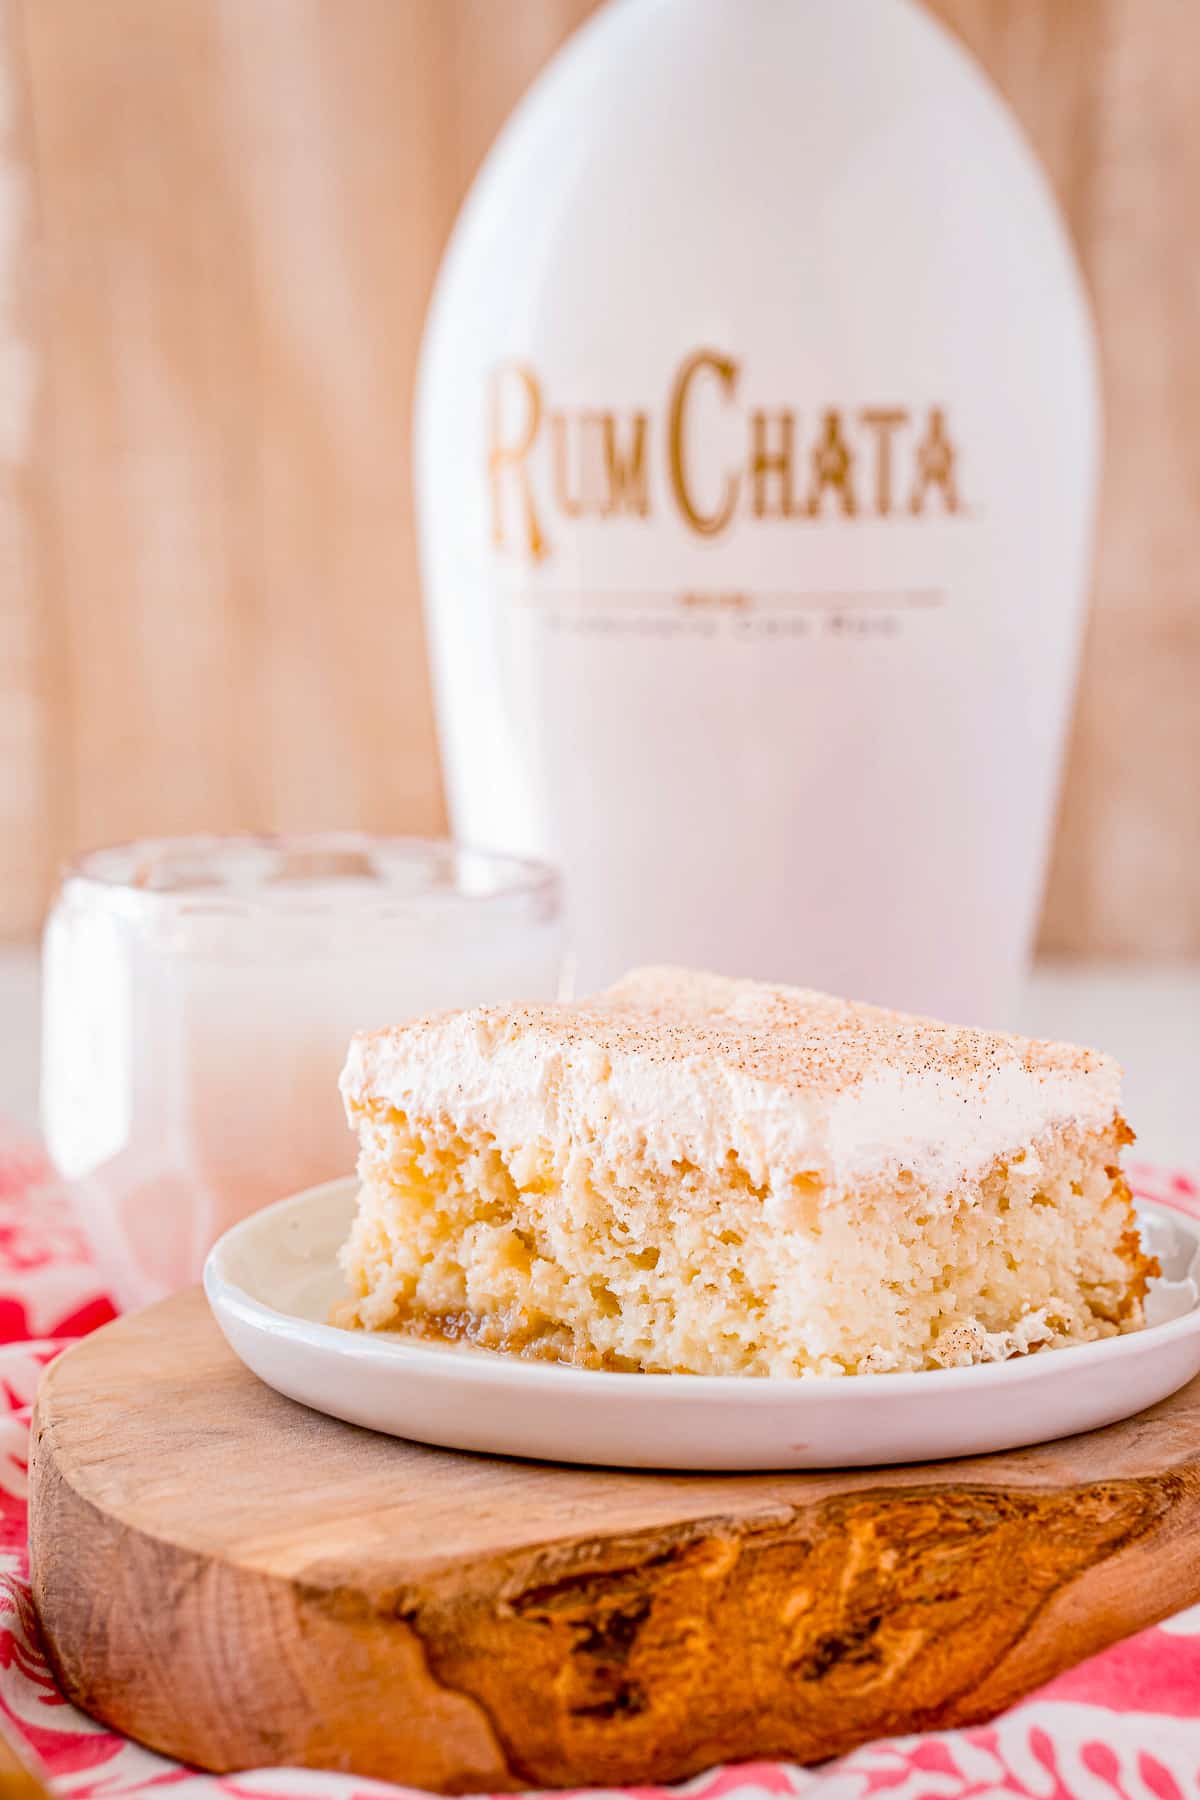 Slice of RumChata Poke Cake on white plate with glass of milk and alcohol in background.